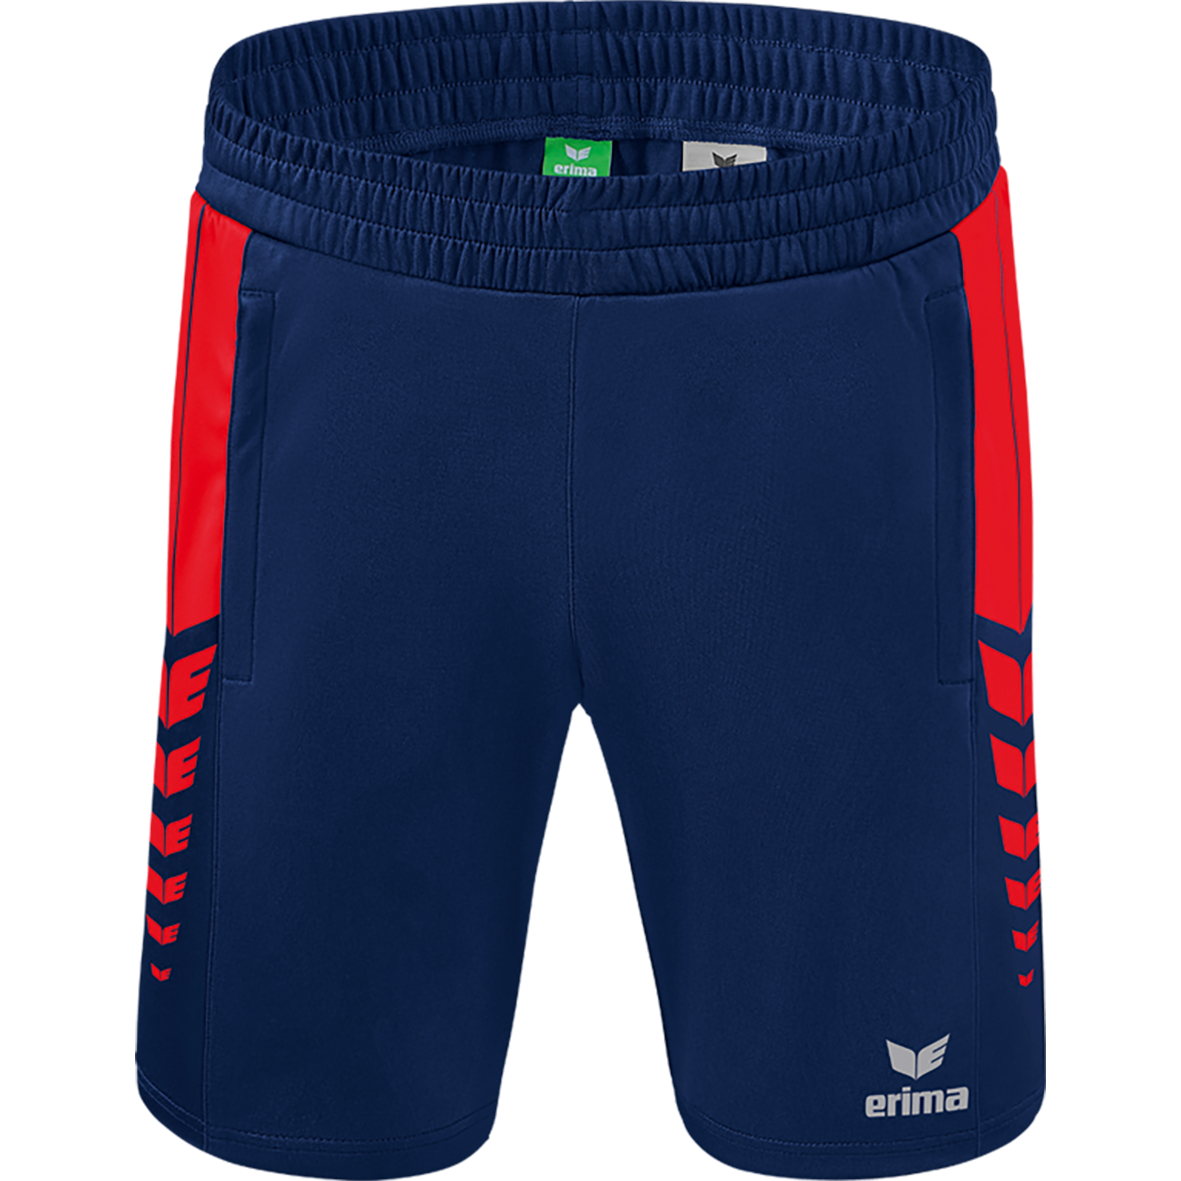 ERIMA SIX WINGS WORKER SHORTS, NEW NAVY-RED KIDS.